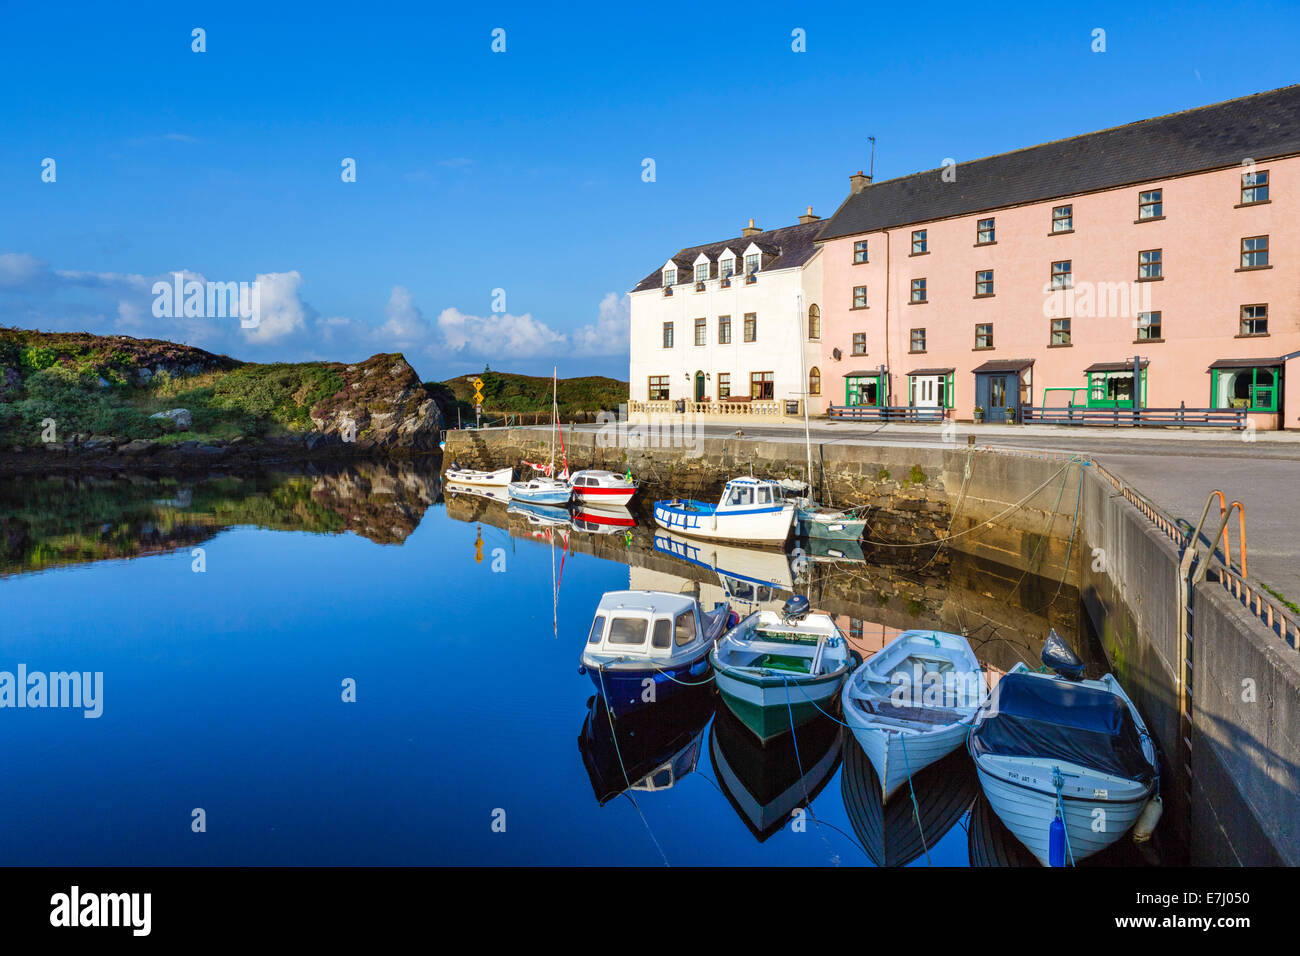 The small picturesque harbour in Bunbeg, Gweedore, County Donegal, Republic of Ireland Stock Photo